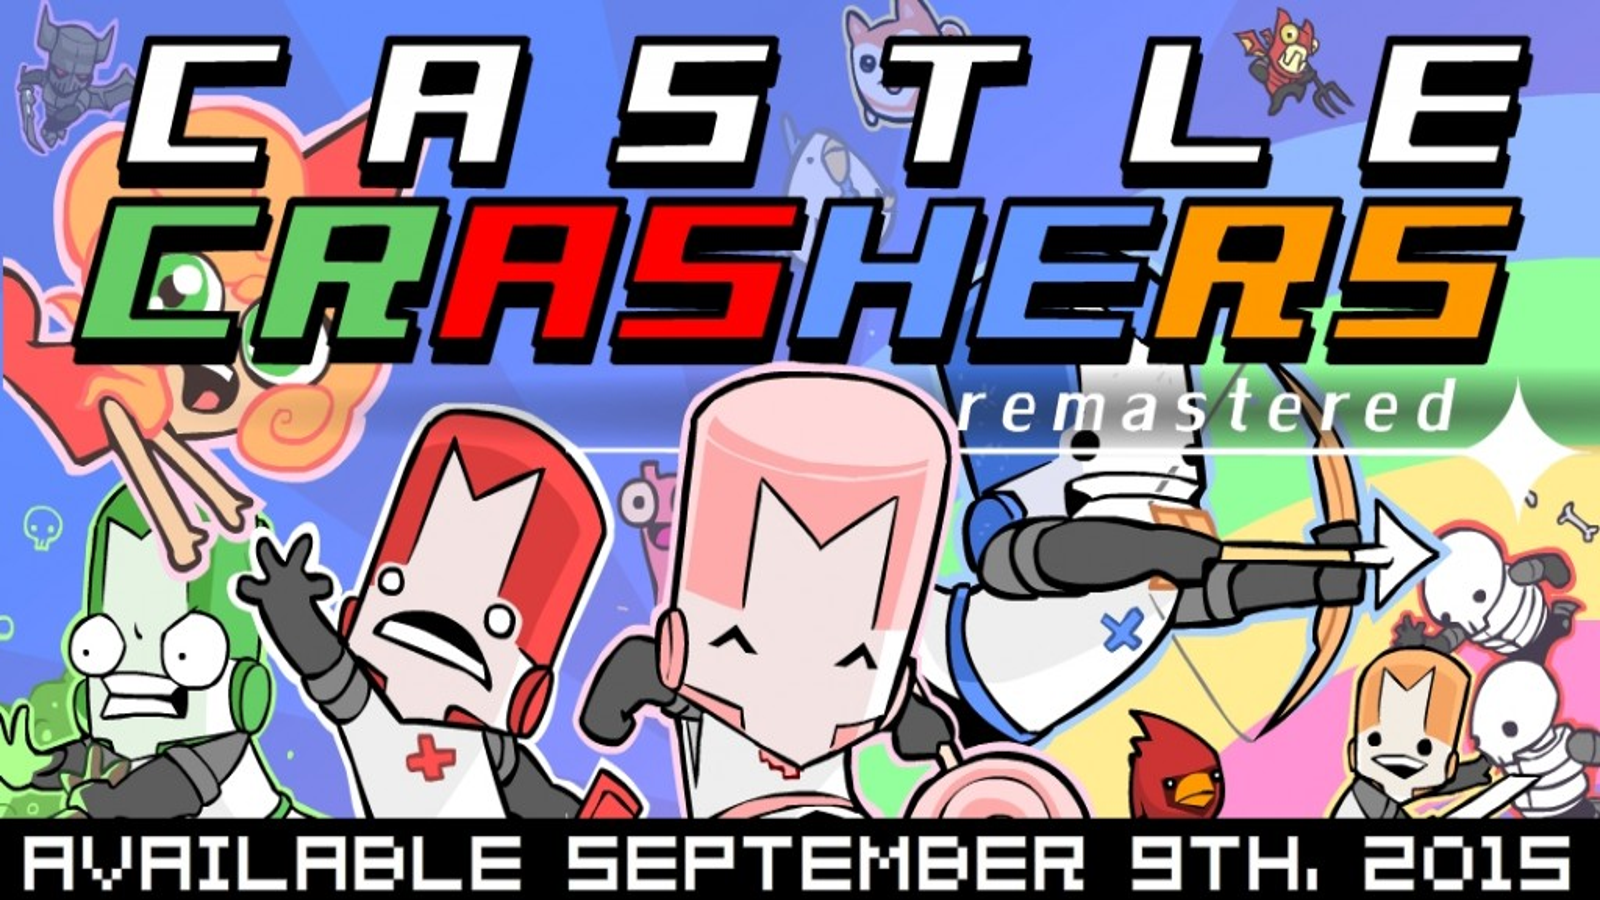 Castle Crashers - Online Game of the Week